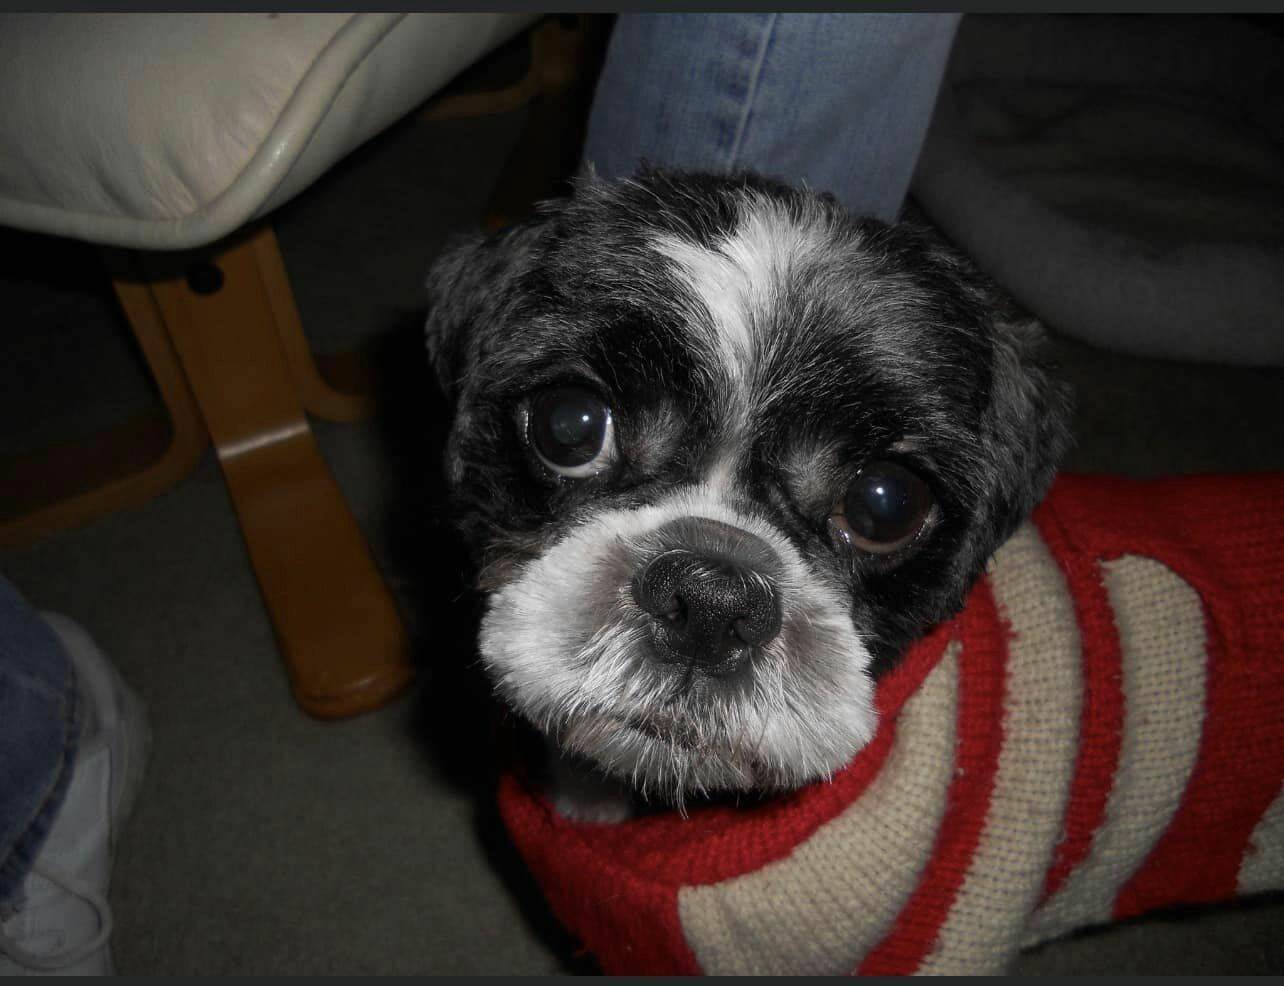 Gizmo, an eleven-year-old Shih Tzu, was taken in a car theft earlier this month but has now been returned. Photo courtesy of Dara Mandeville